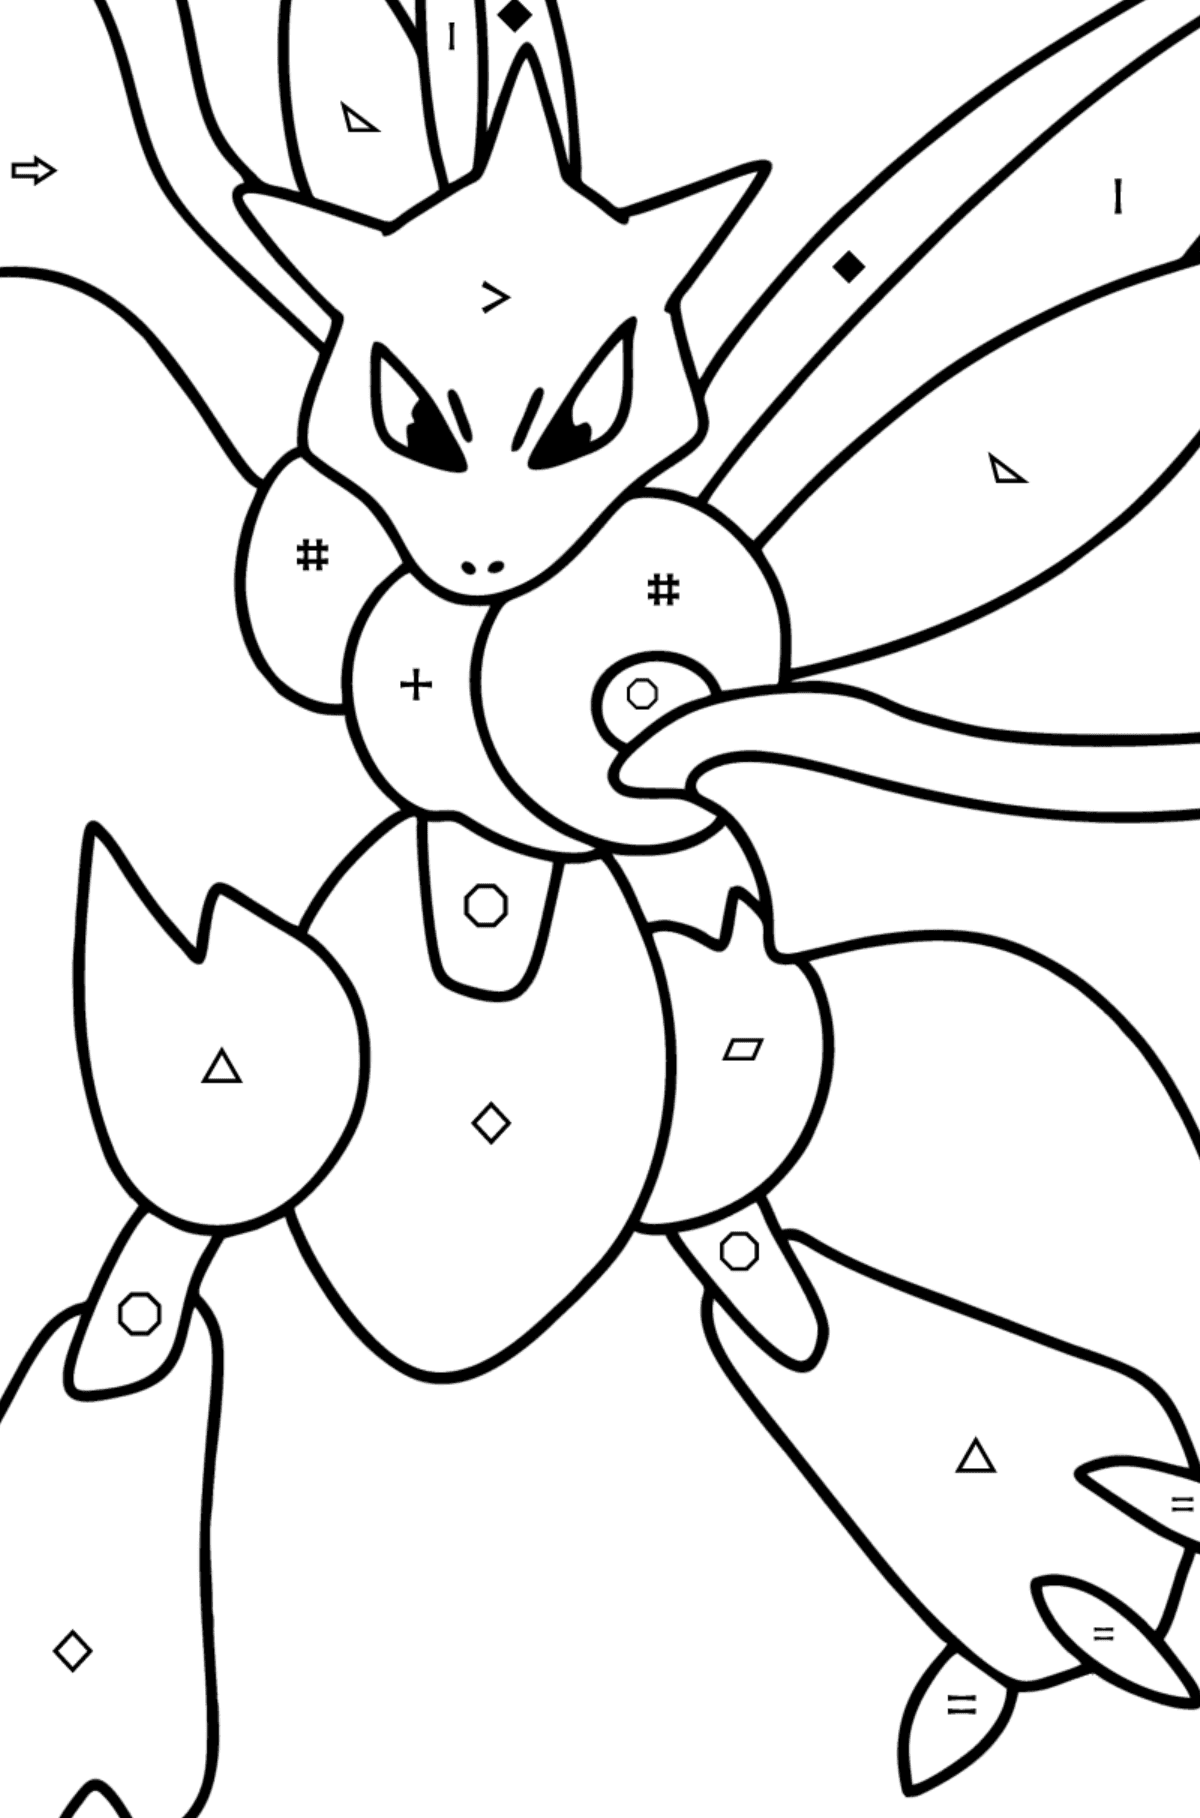 Coloring page Pokemon Go Scyther - Coloring by Symbols and Geometric Shapes for Kids